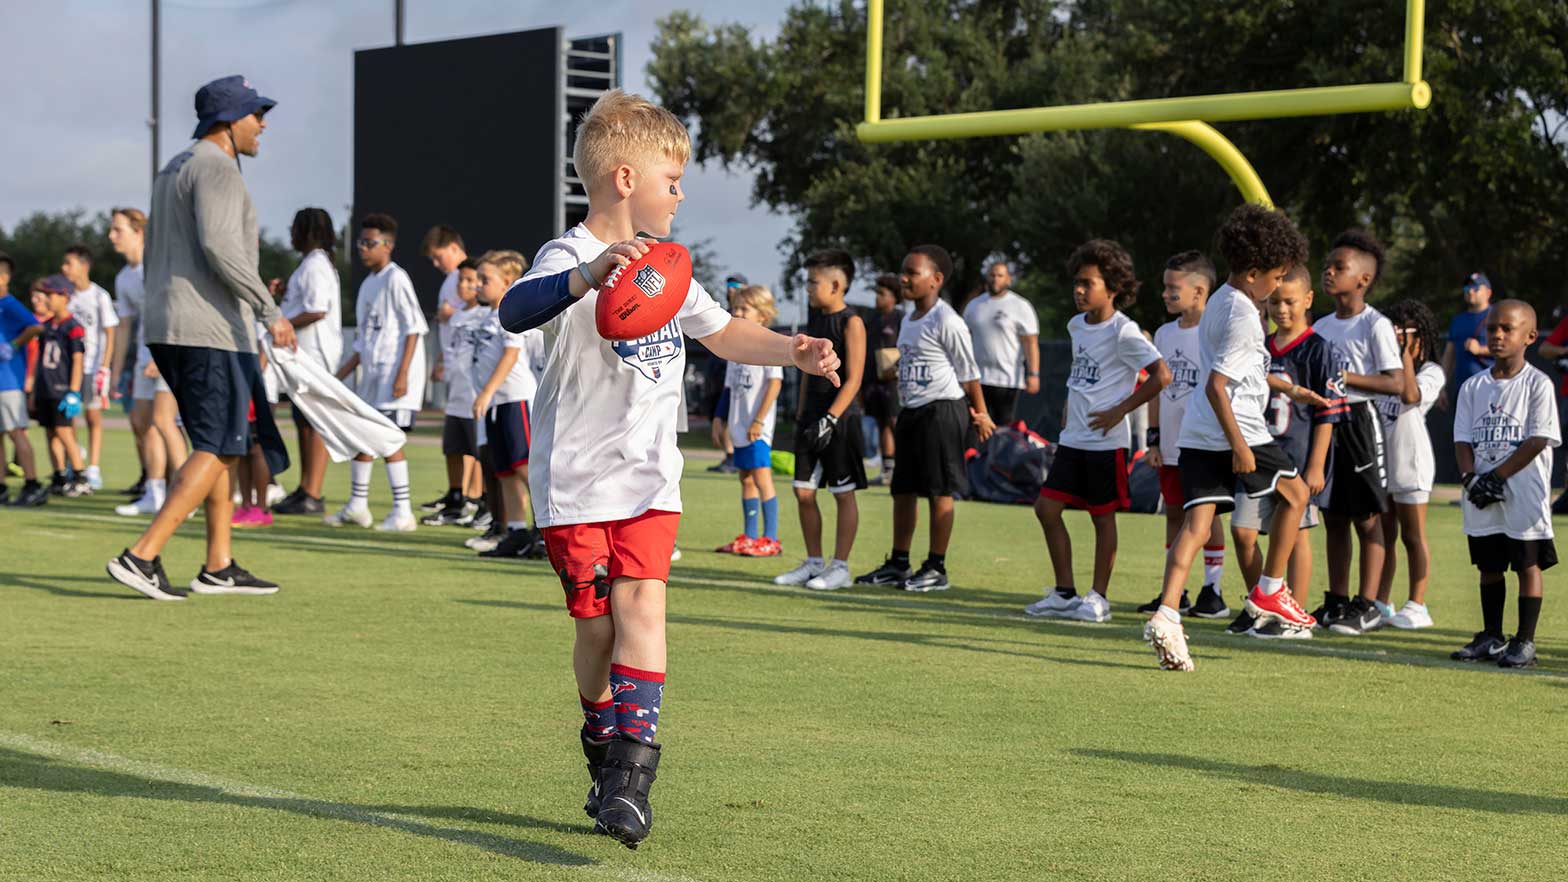 a kid getting ready to throw a football to another player